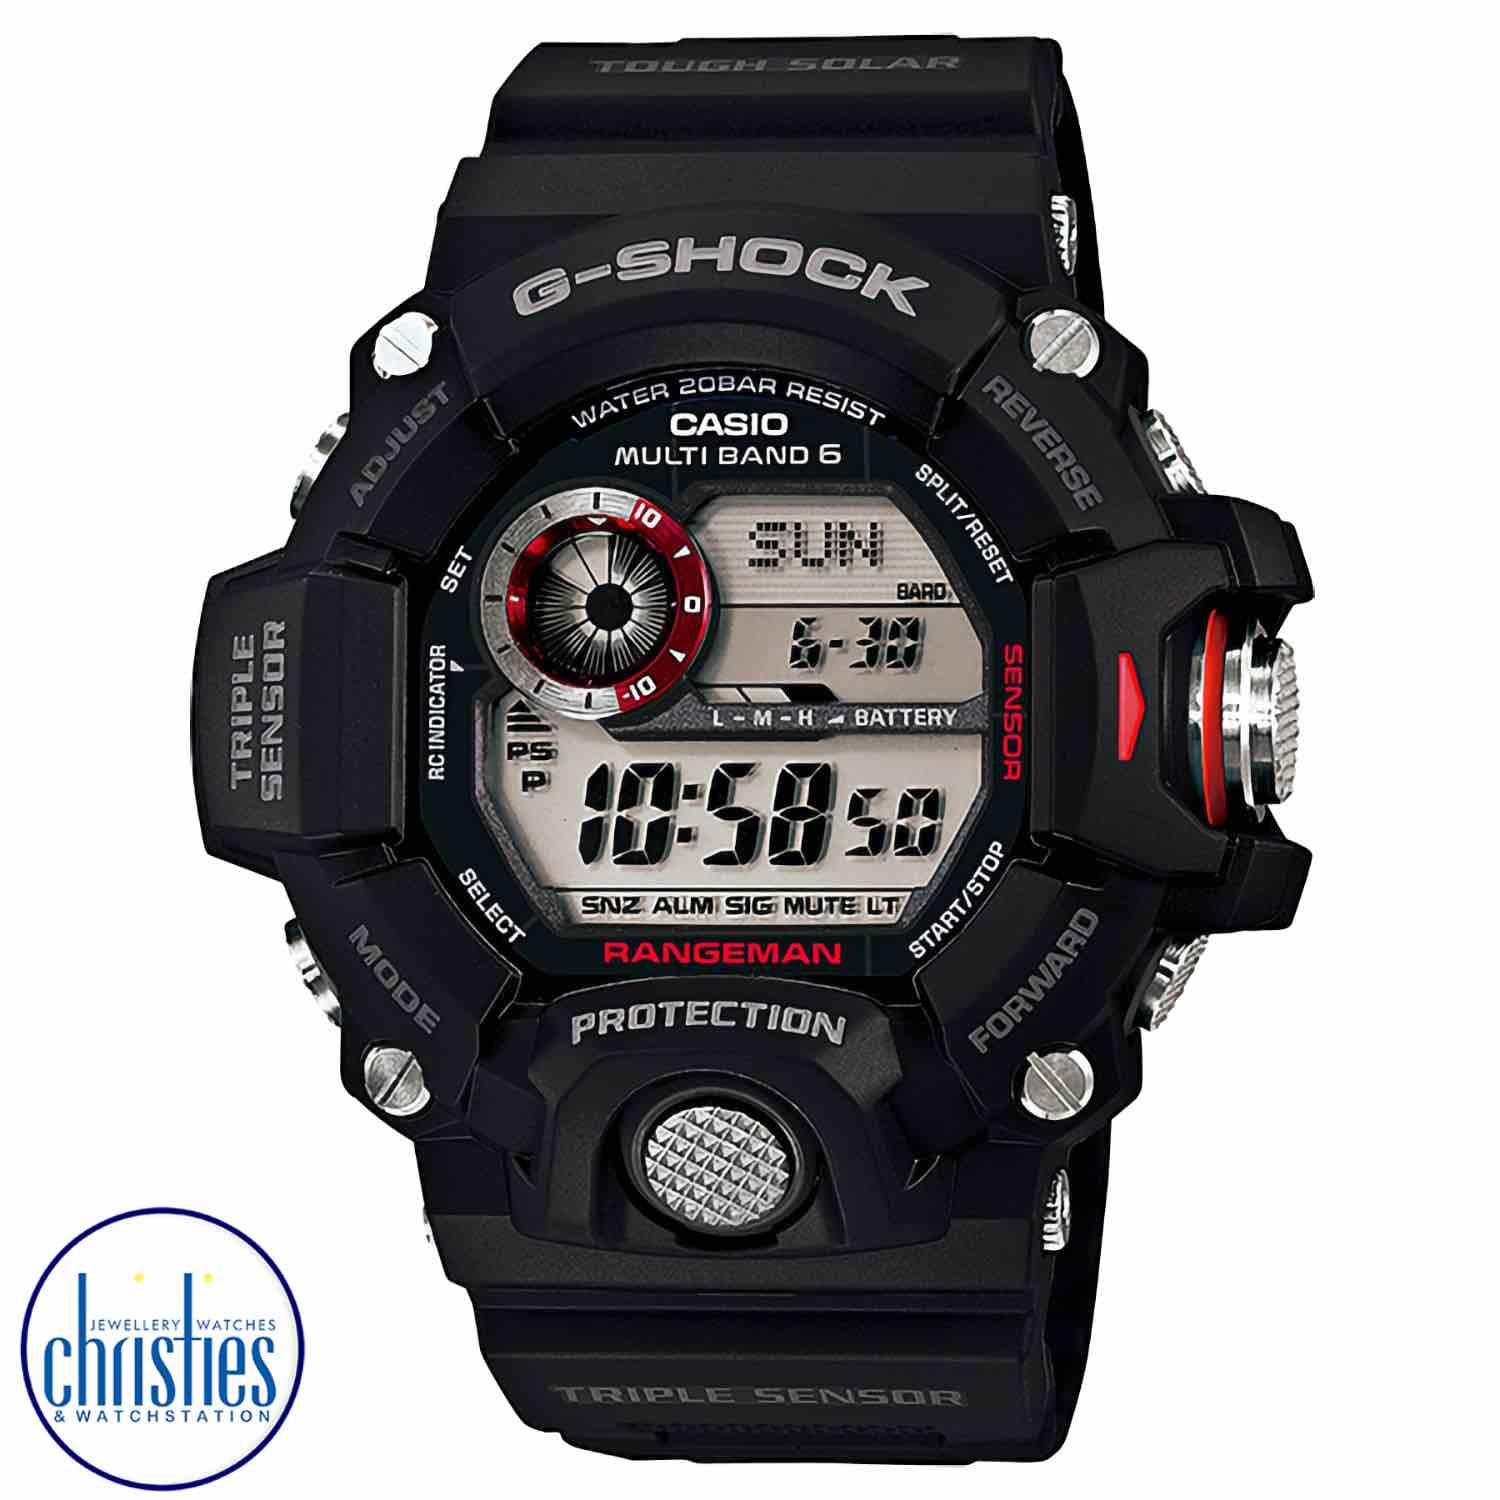 GW9400-1D G-Shock Rangeman Triple Sensor Watch. Introducing RANGEMAN, the latest addition to the Master of G series of brutal and rugged timepieces designed and engineered to stand up to the most gruelling conditions imaginable.